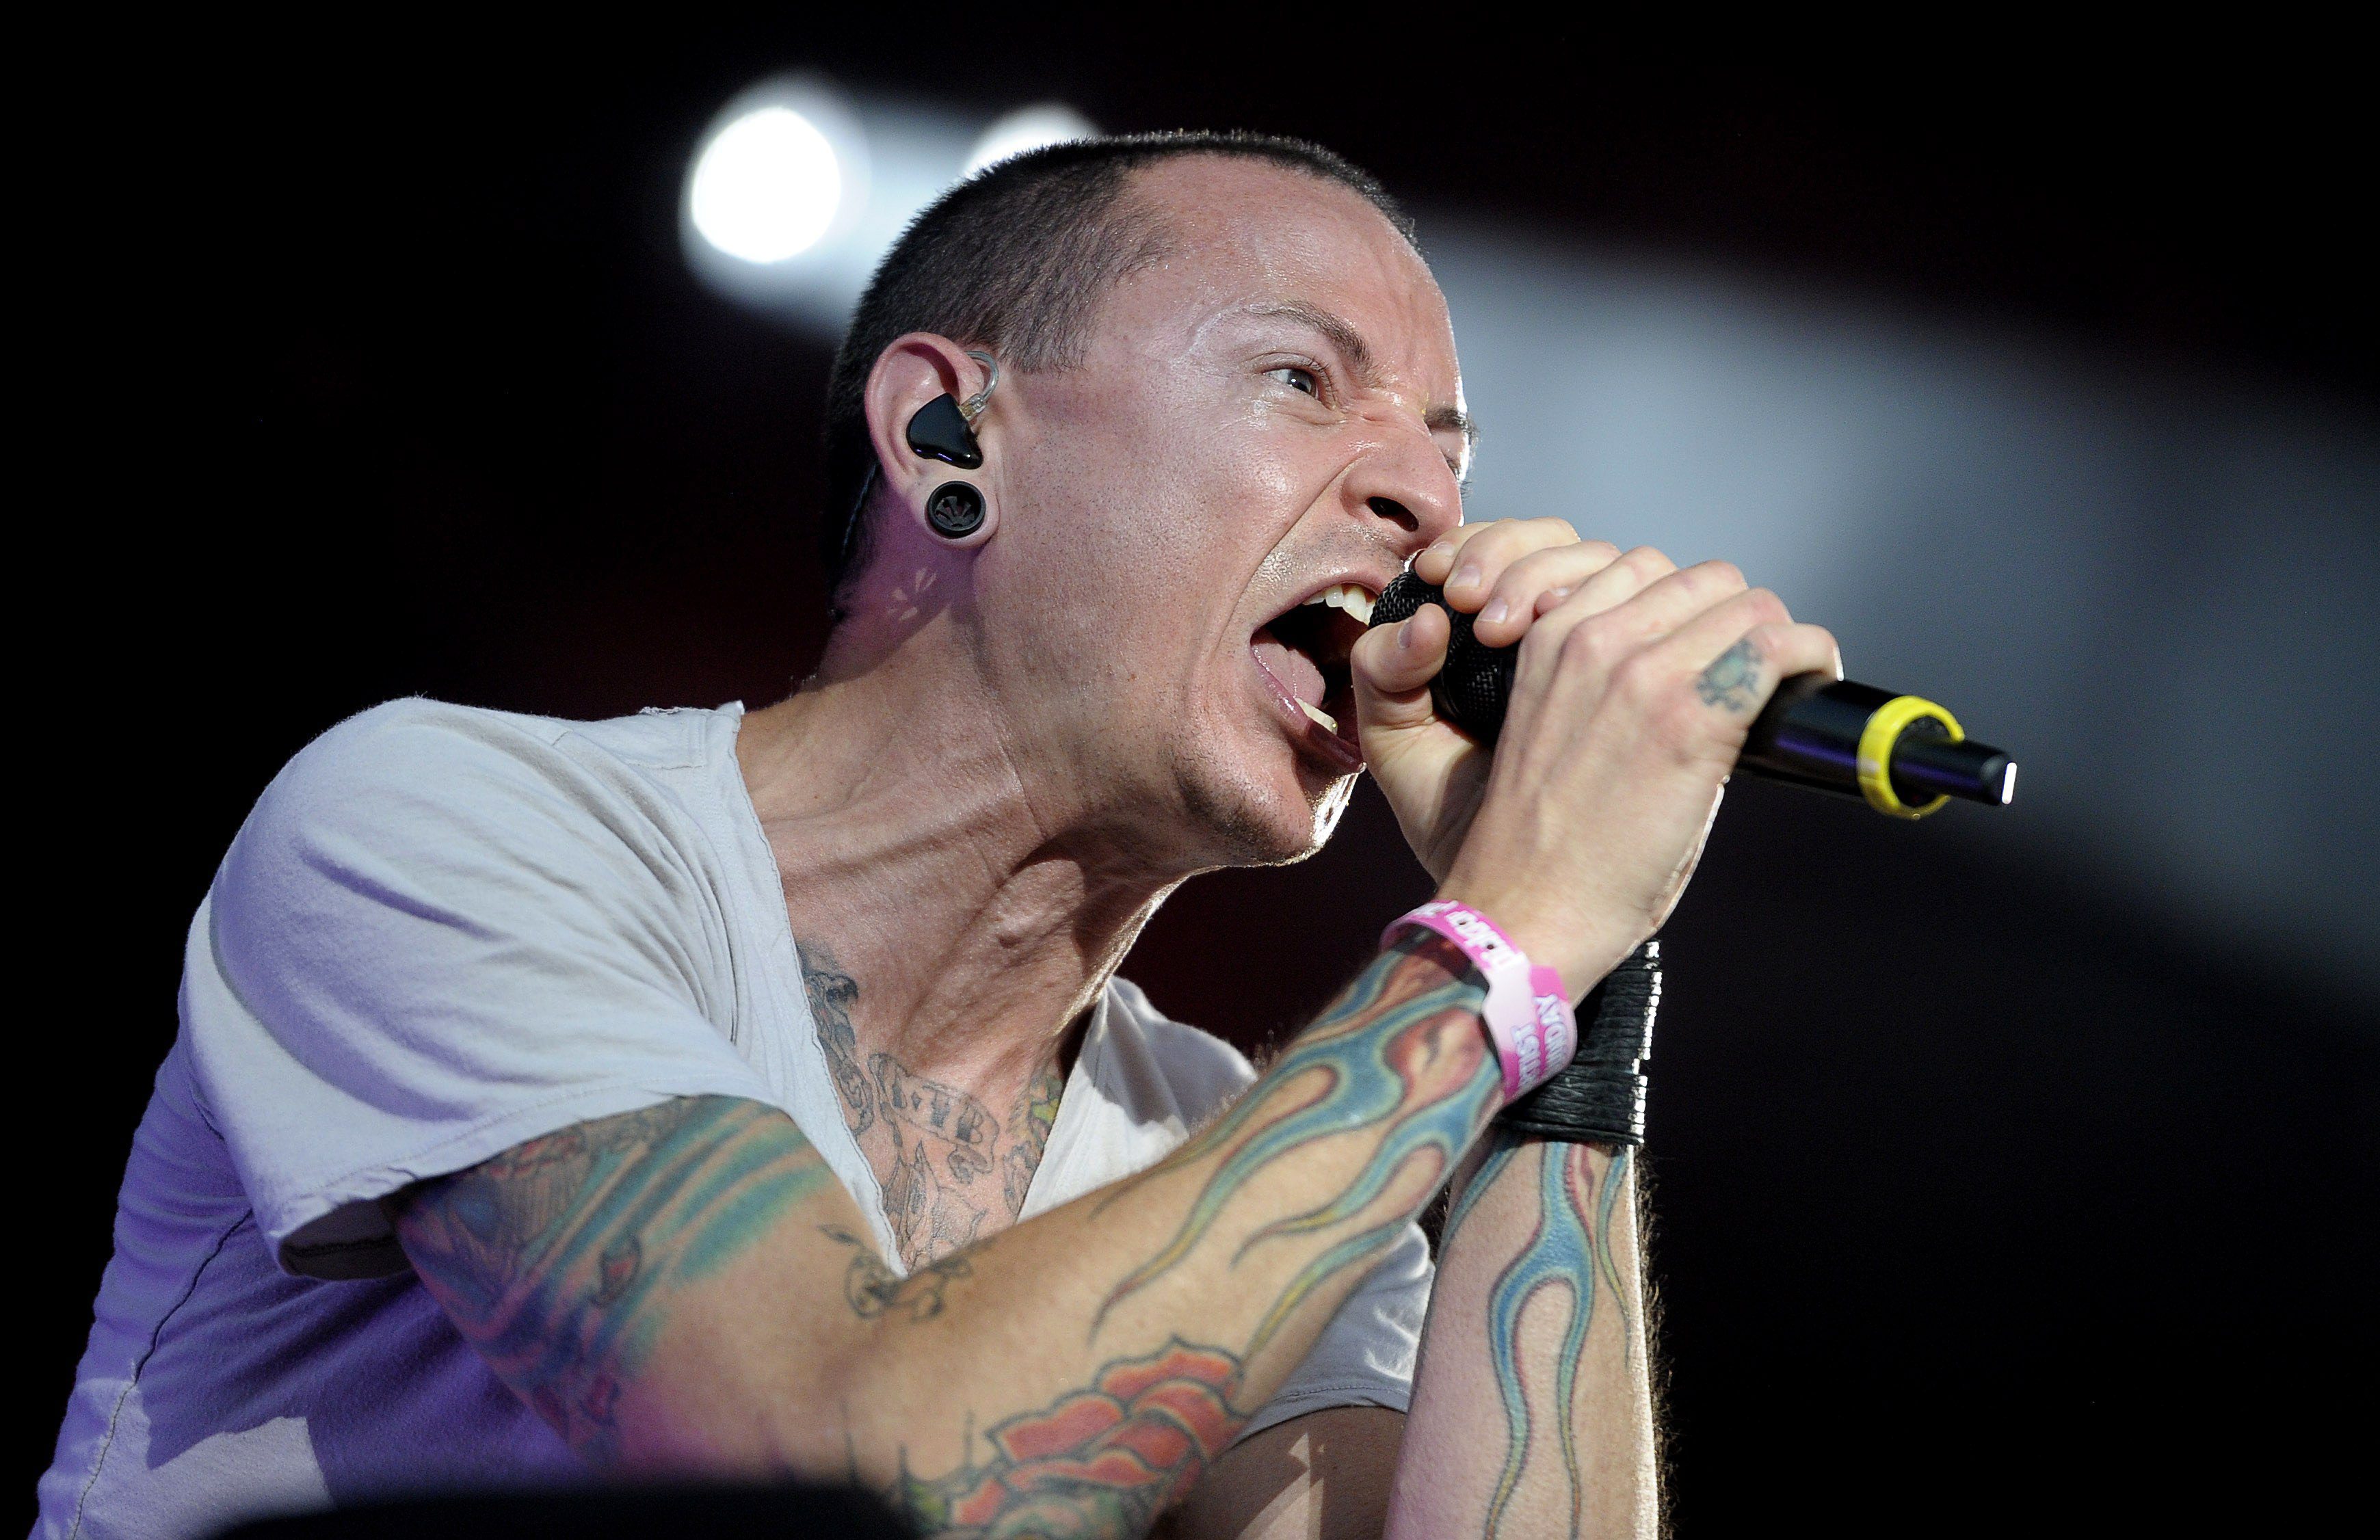 Linkin Park frontman Chester Bennington died by hanging, L.A. County  coroner says - Los Angeles Times